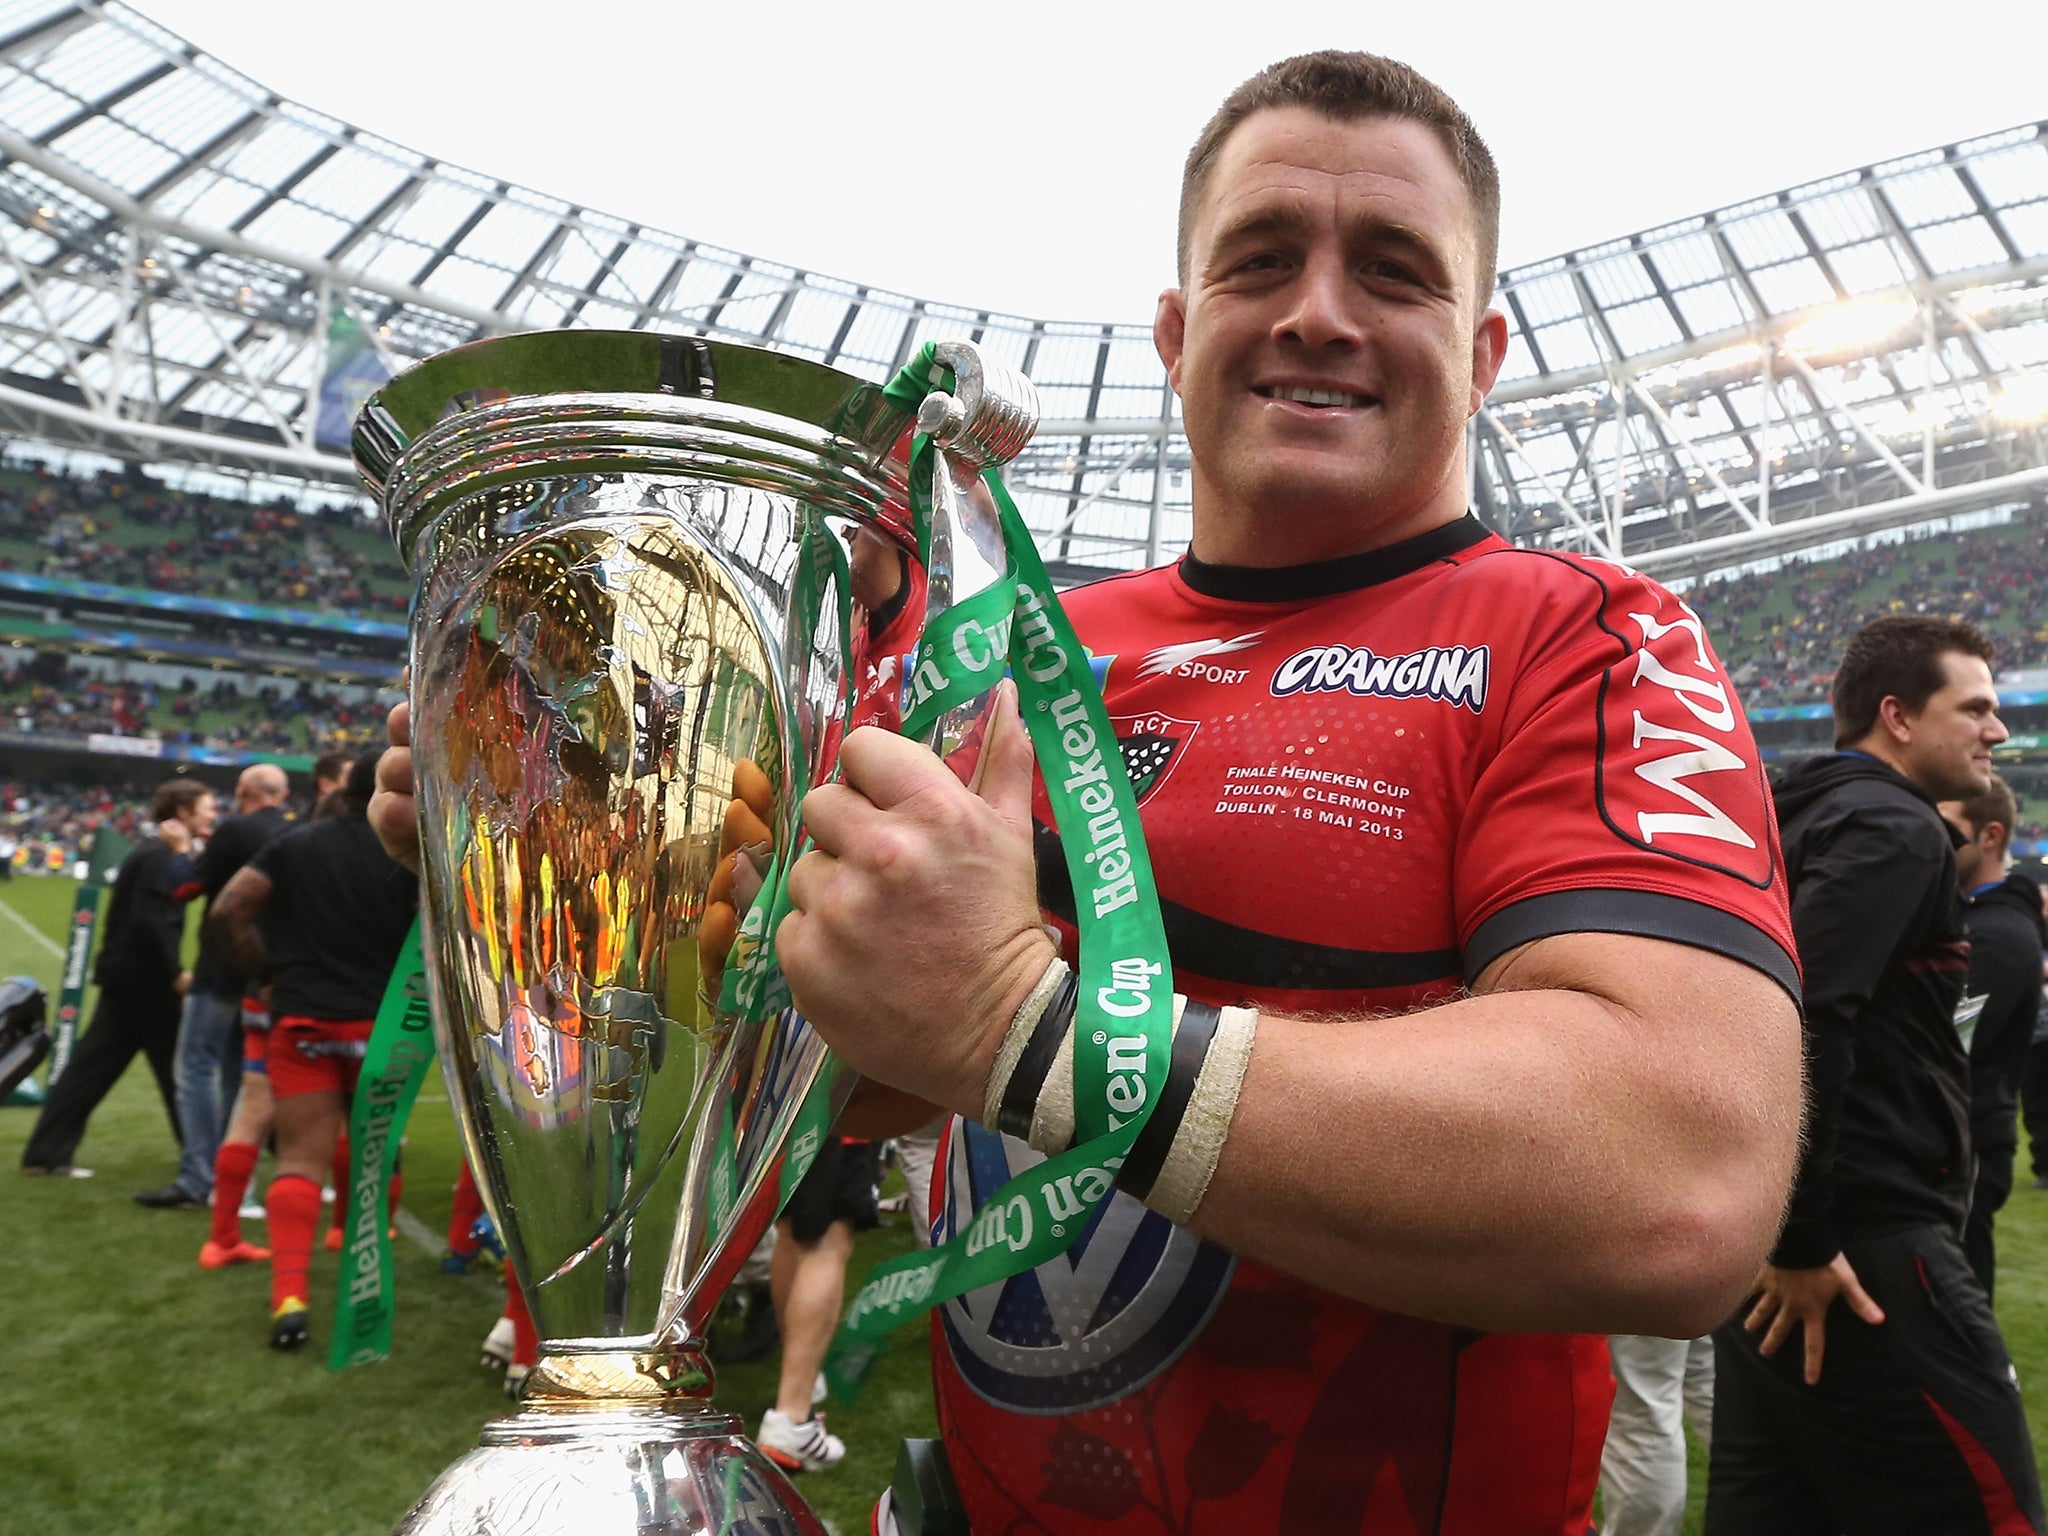 Sheridan of Toulon holds the Cup after their victory during the Heineken Cup final match between ASM Clermont Auvergne 